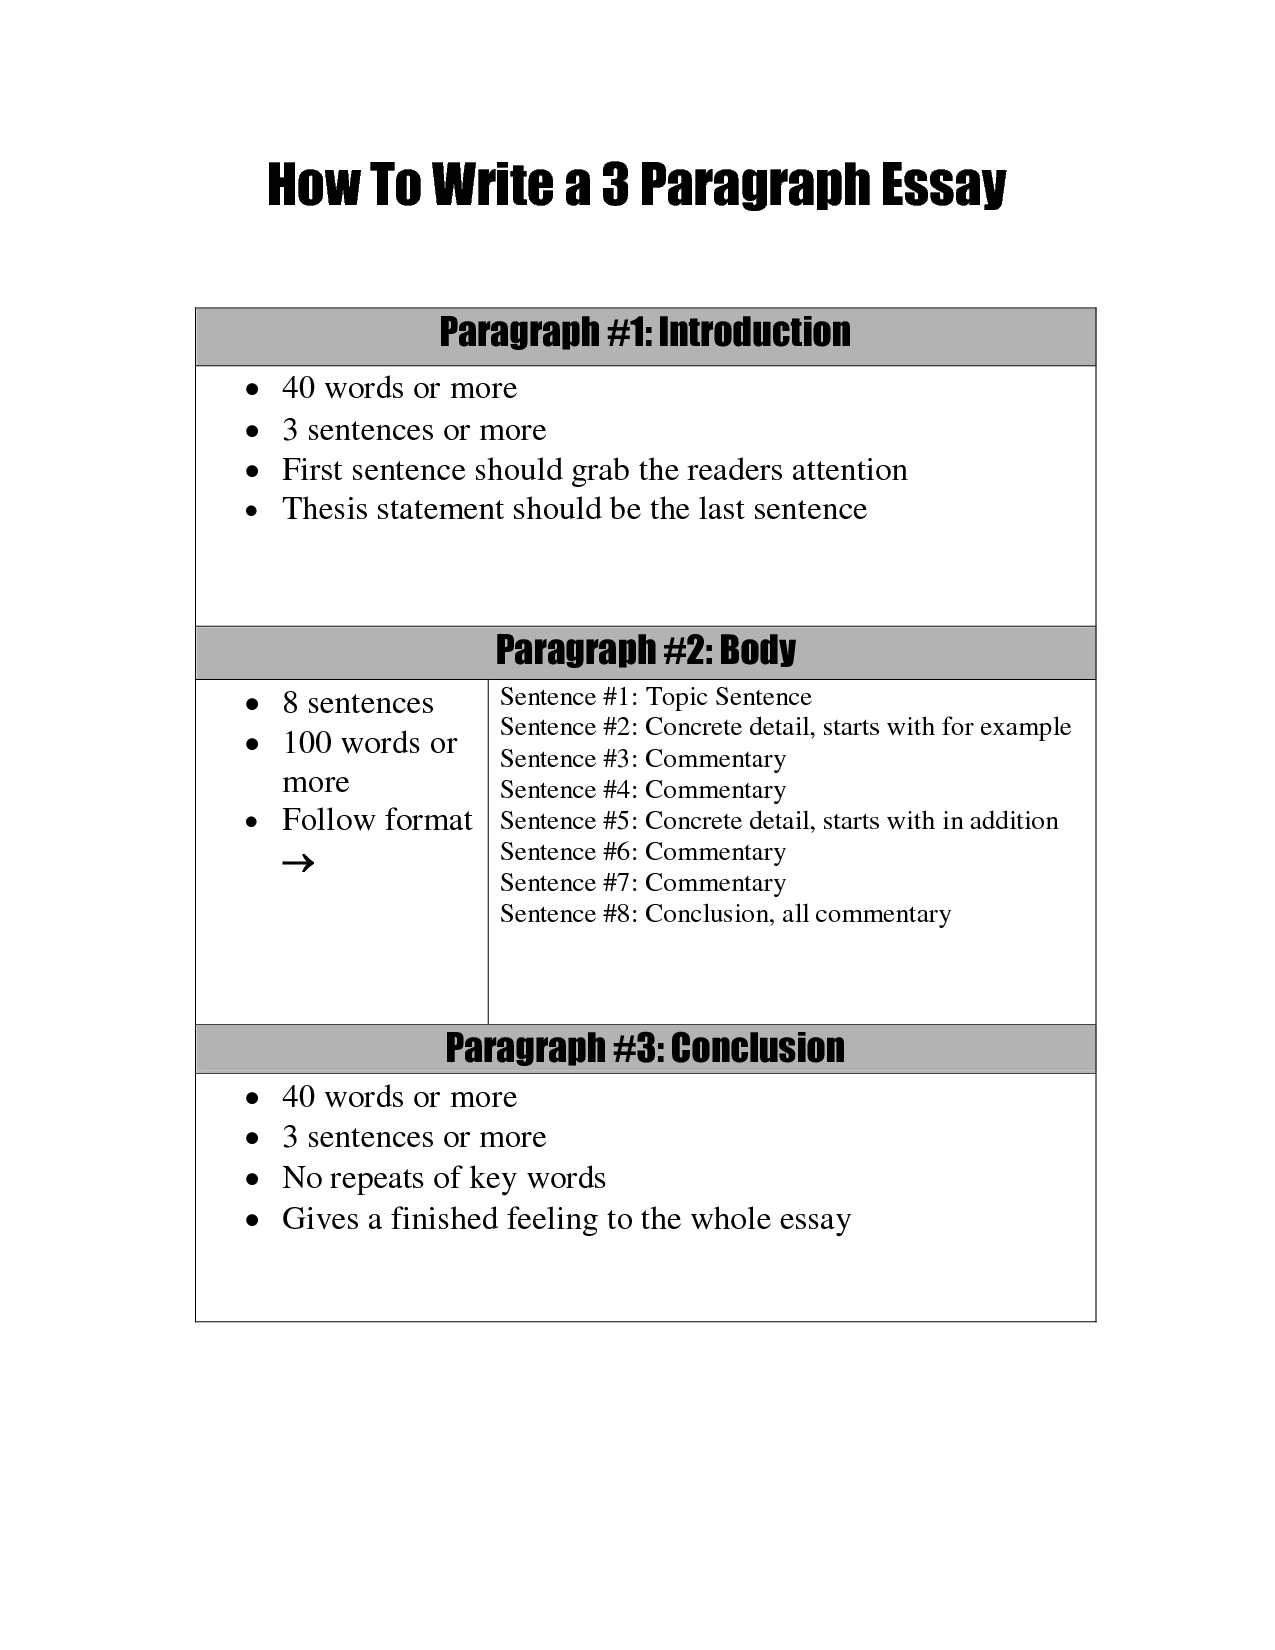 how to write a 3 paragraph biography